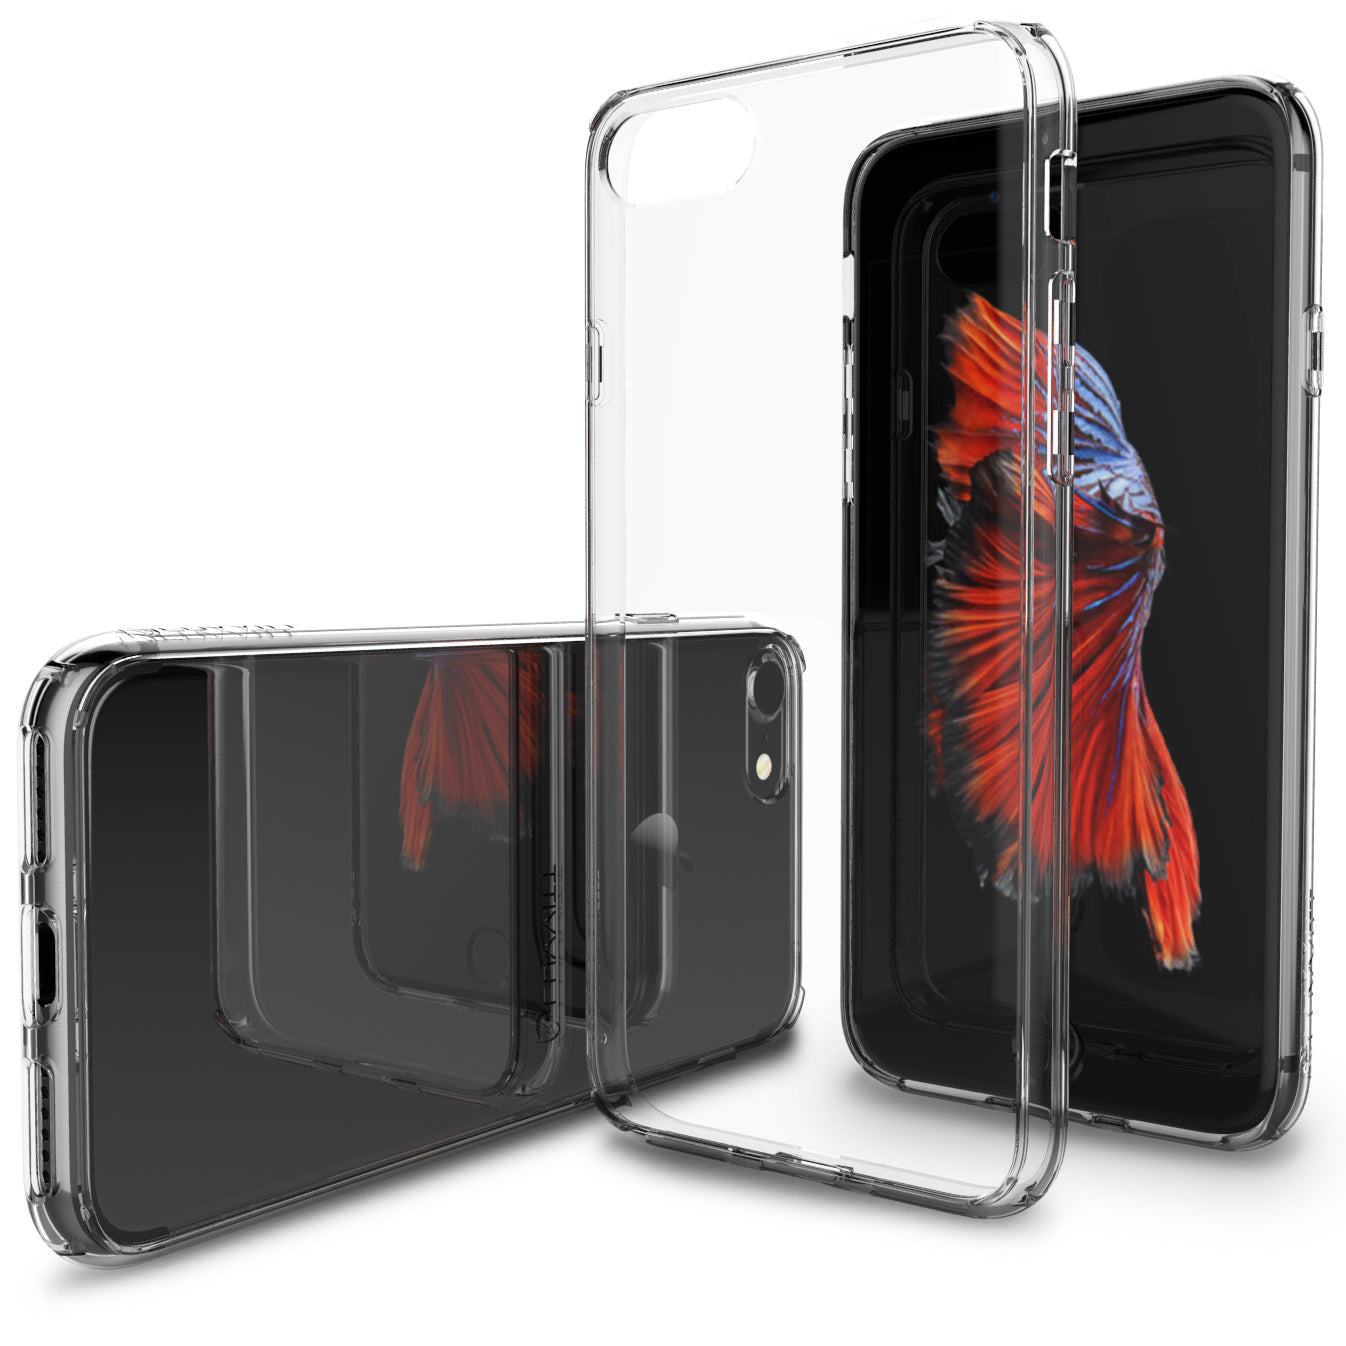 Luvvitt Crystal View Hybrid Case for iPhone 7 and 8 - Crystal Clear